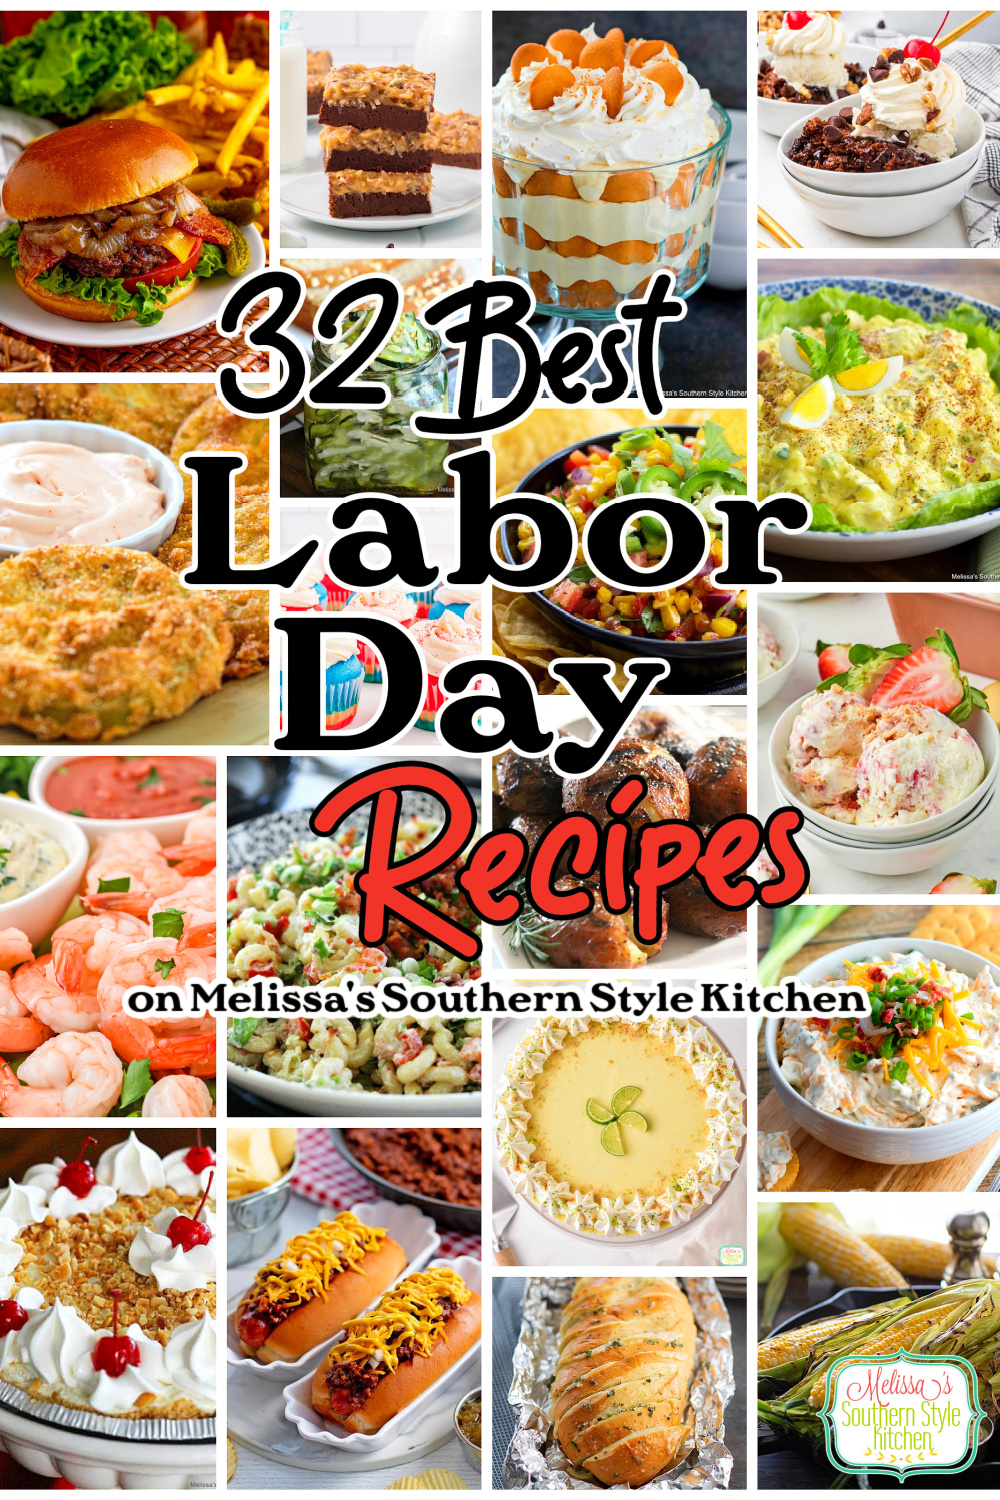 This collection of 32 Best Labor Day Recipes is perfect for your end of summer party #bestlabordaydesserts #appetizerrecipes #grilling #southerndesserts #appetizers #sidedishes #cookout #labordayrecipes